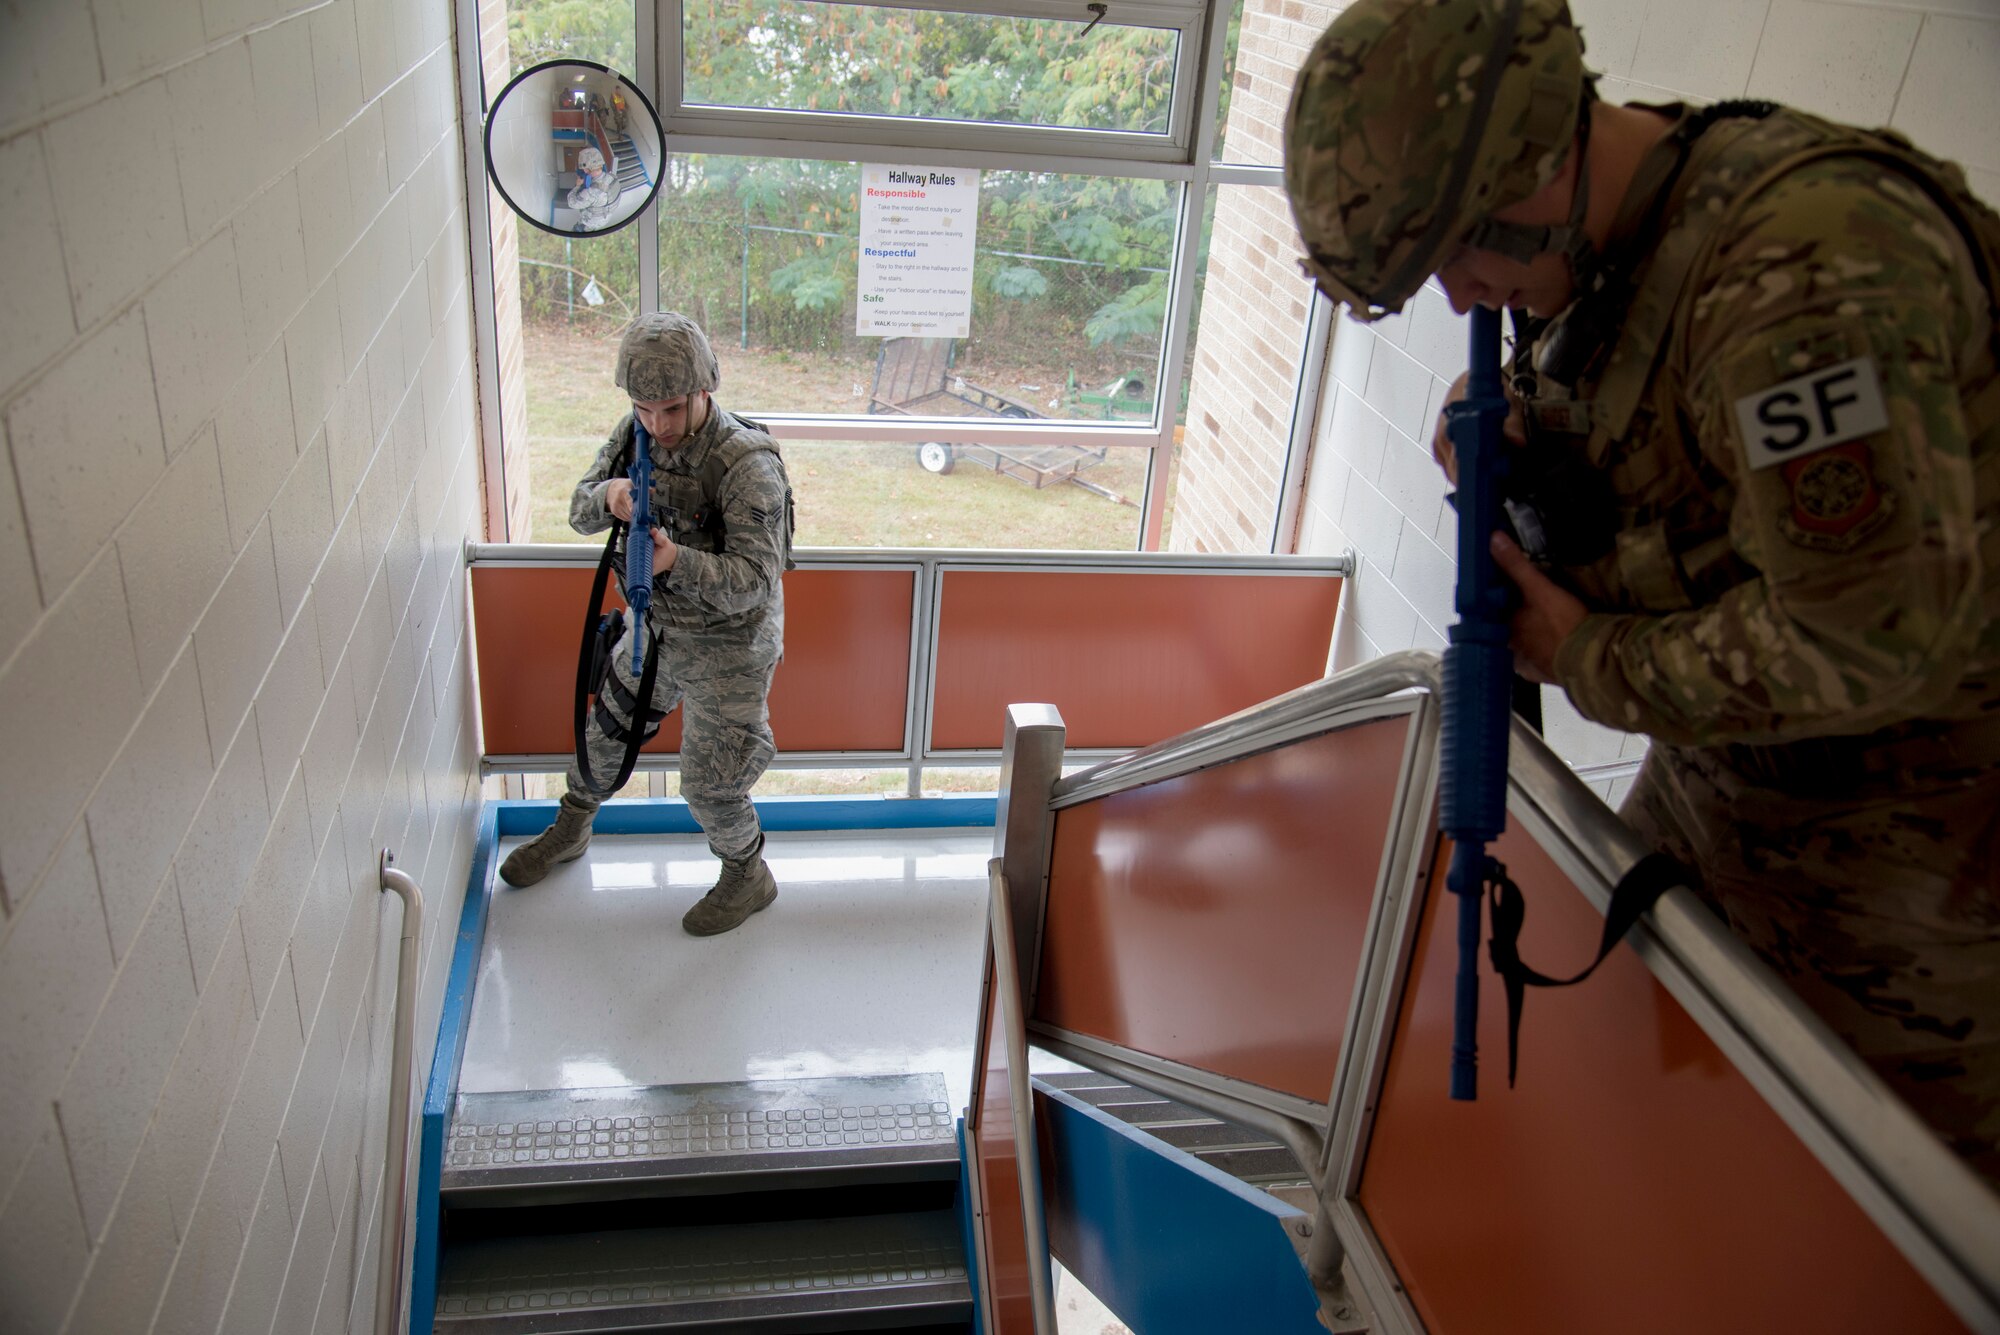 Senior Airman Miguel Bettencourt (left), 436th Security Forces Squadron response member, and Staff Sgt. Harold Snyder, 436th Security Forces Squadron flight sergeant, clear a stairwell Oct. 11, 2019, at Dover Air Force Base, Del. Every location inside the schools was swept for hostiles and noncombatants. (U.S. Air Force photo by Airman 1st Class Jonathan Harding